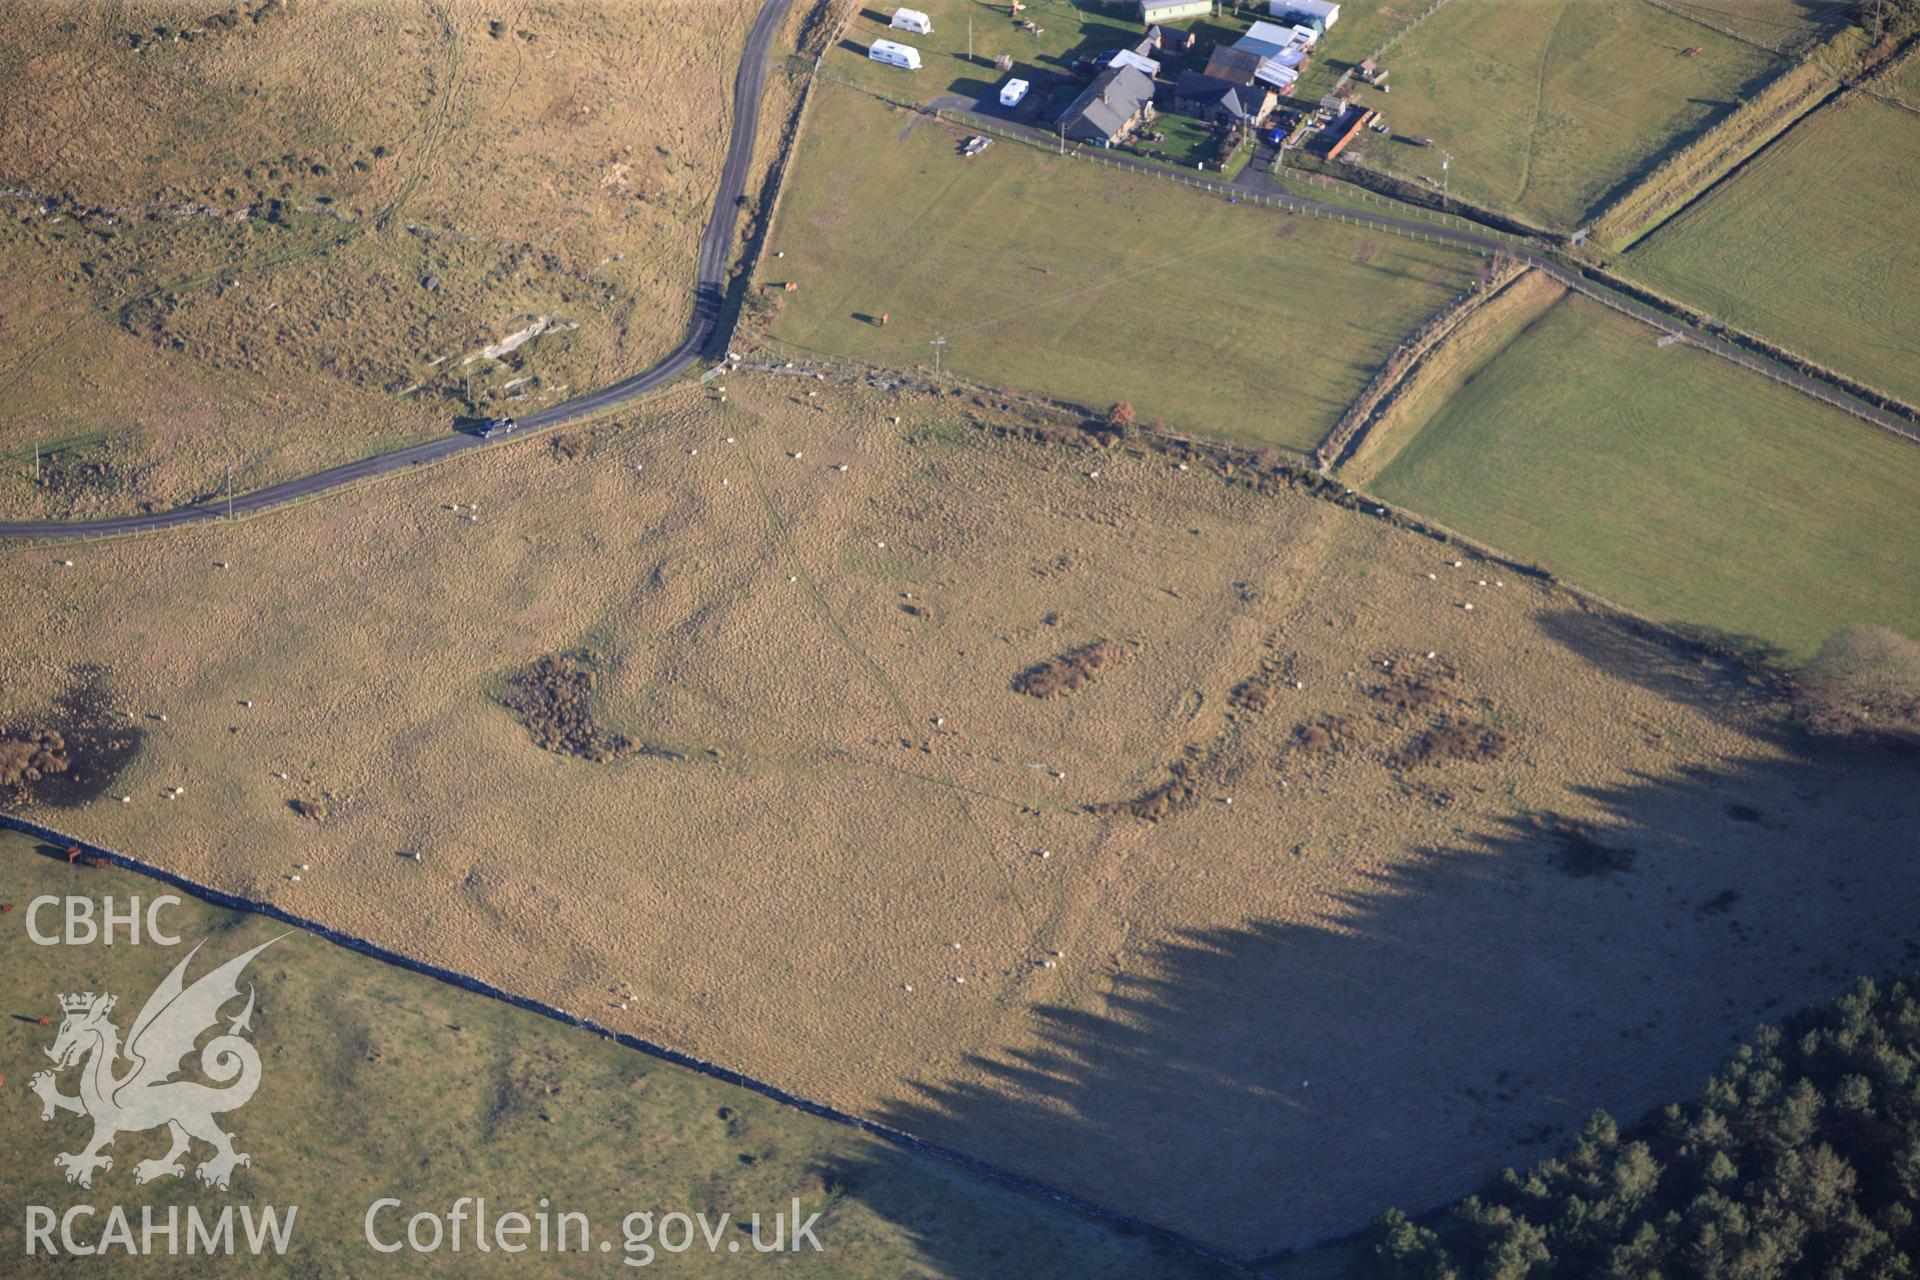 RCAHMW colour oblique photograph of Tanforhesgan earthwork enclosure. Taken by Toby Driver on 10/12/2012.